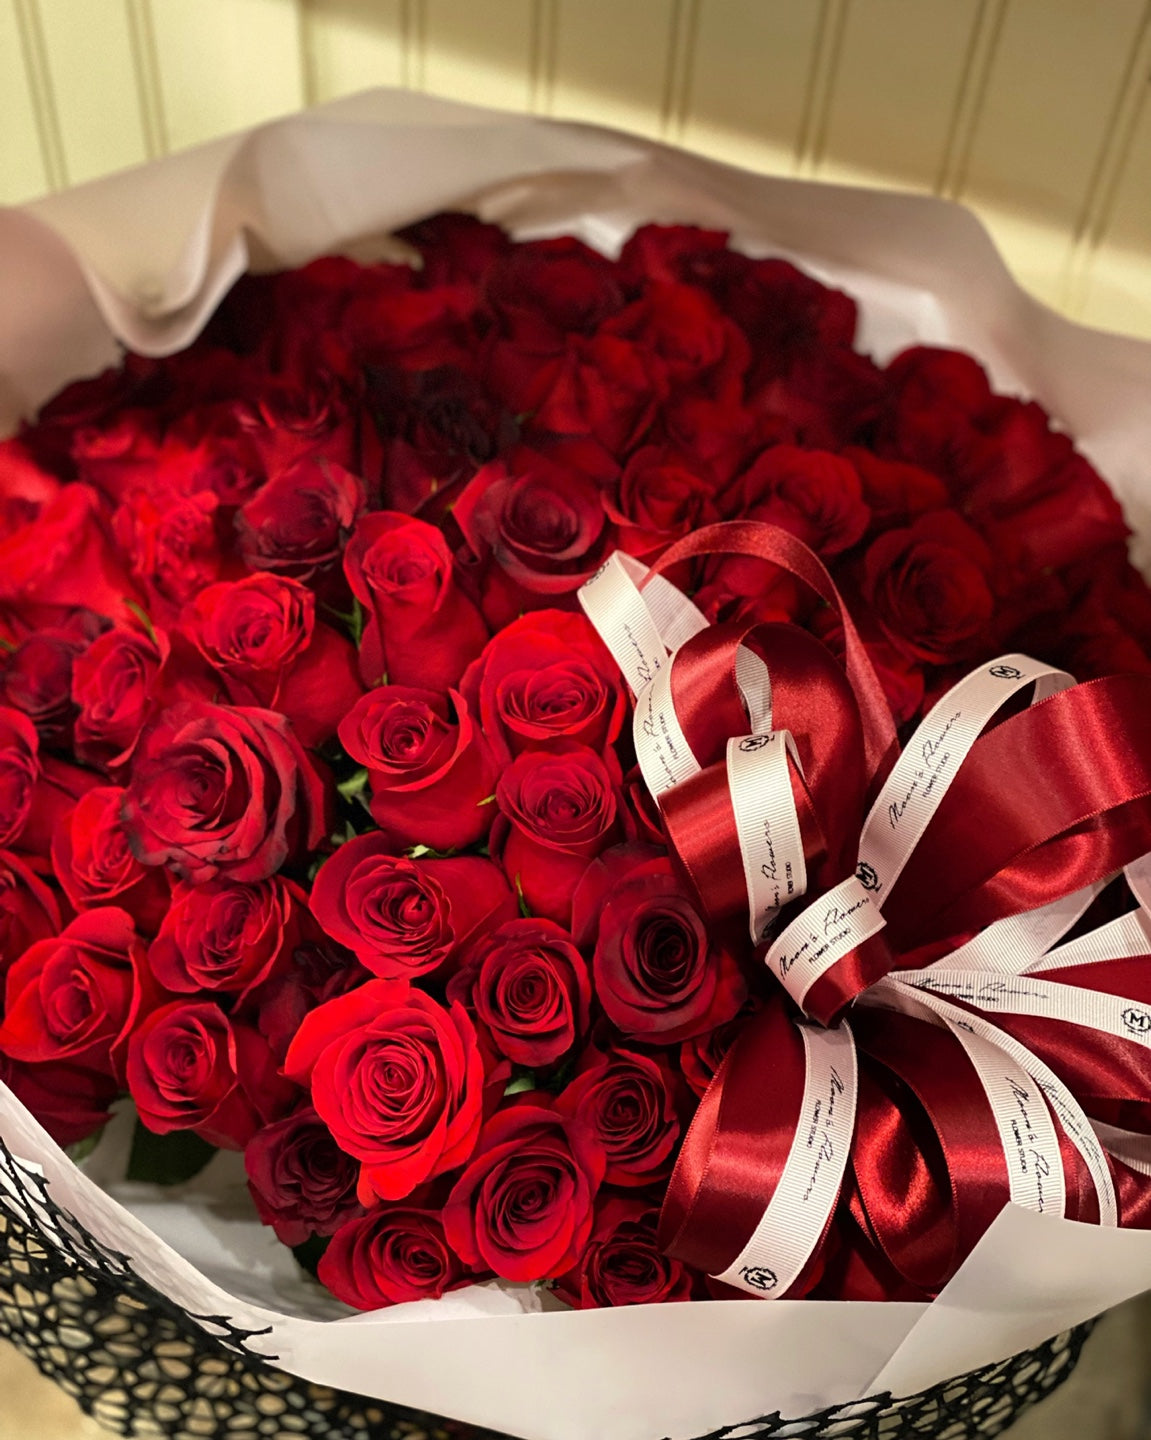 Red Roses Bouquet-100, Flower Delivery Toronto, Same Day Delivery, Moon's Flowers Florist – Same Day Flower Delivery Toronto & GTA, Oakville  Flower Shop